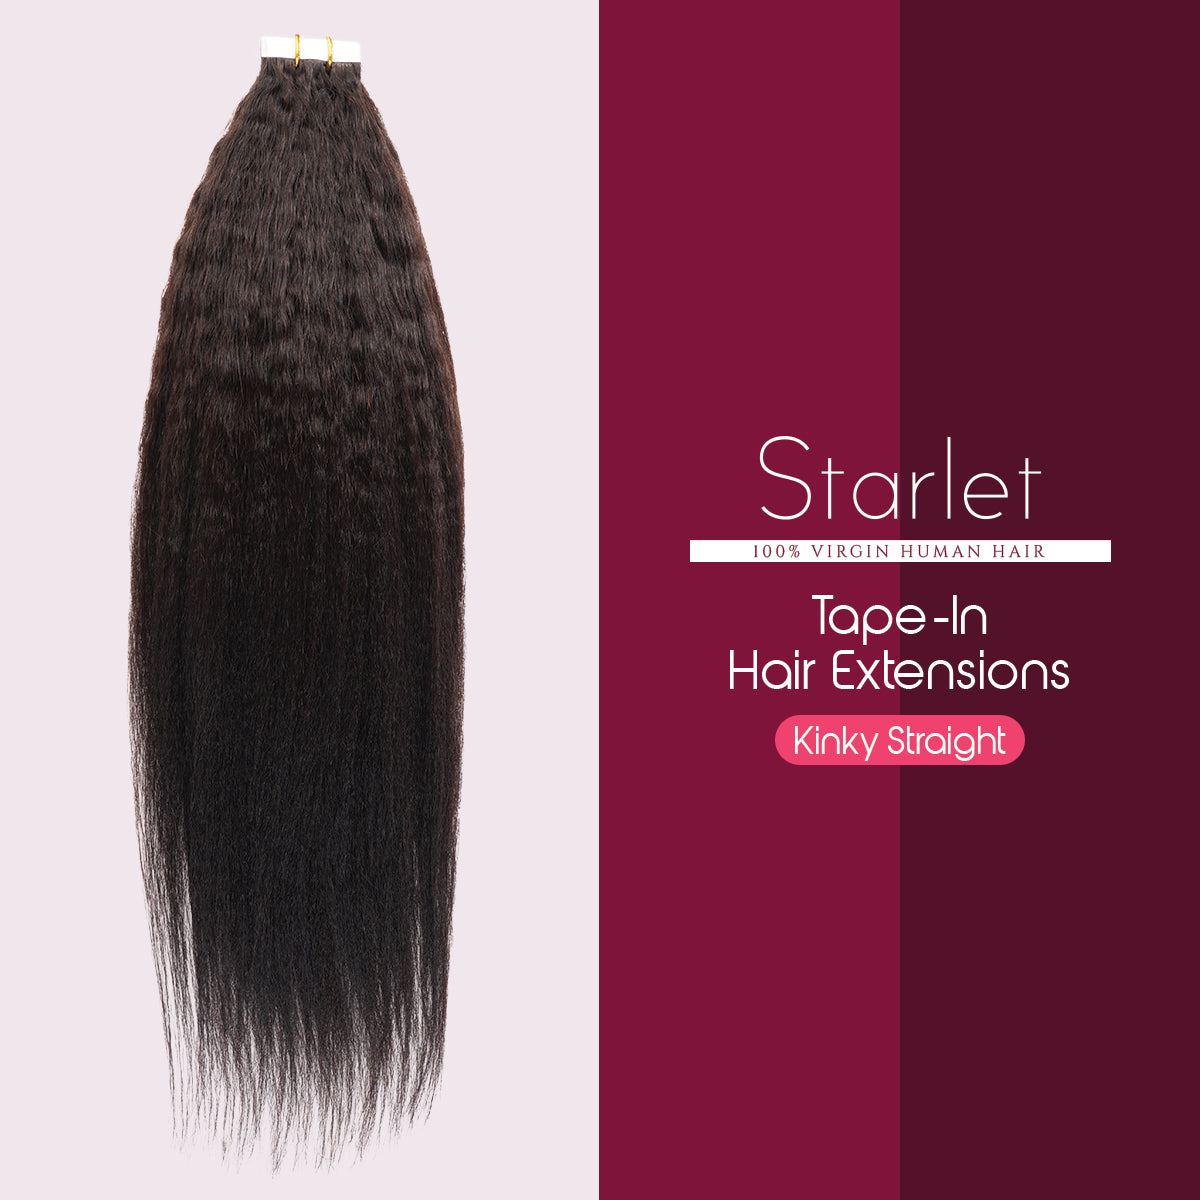 Starlet 100% Virgin Unprocessed Human Hair Tape-In Extension 20Pcs Kinky Straight